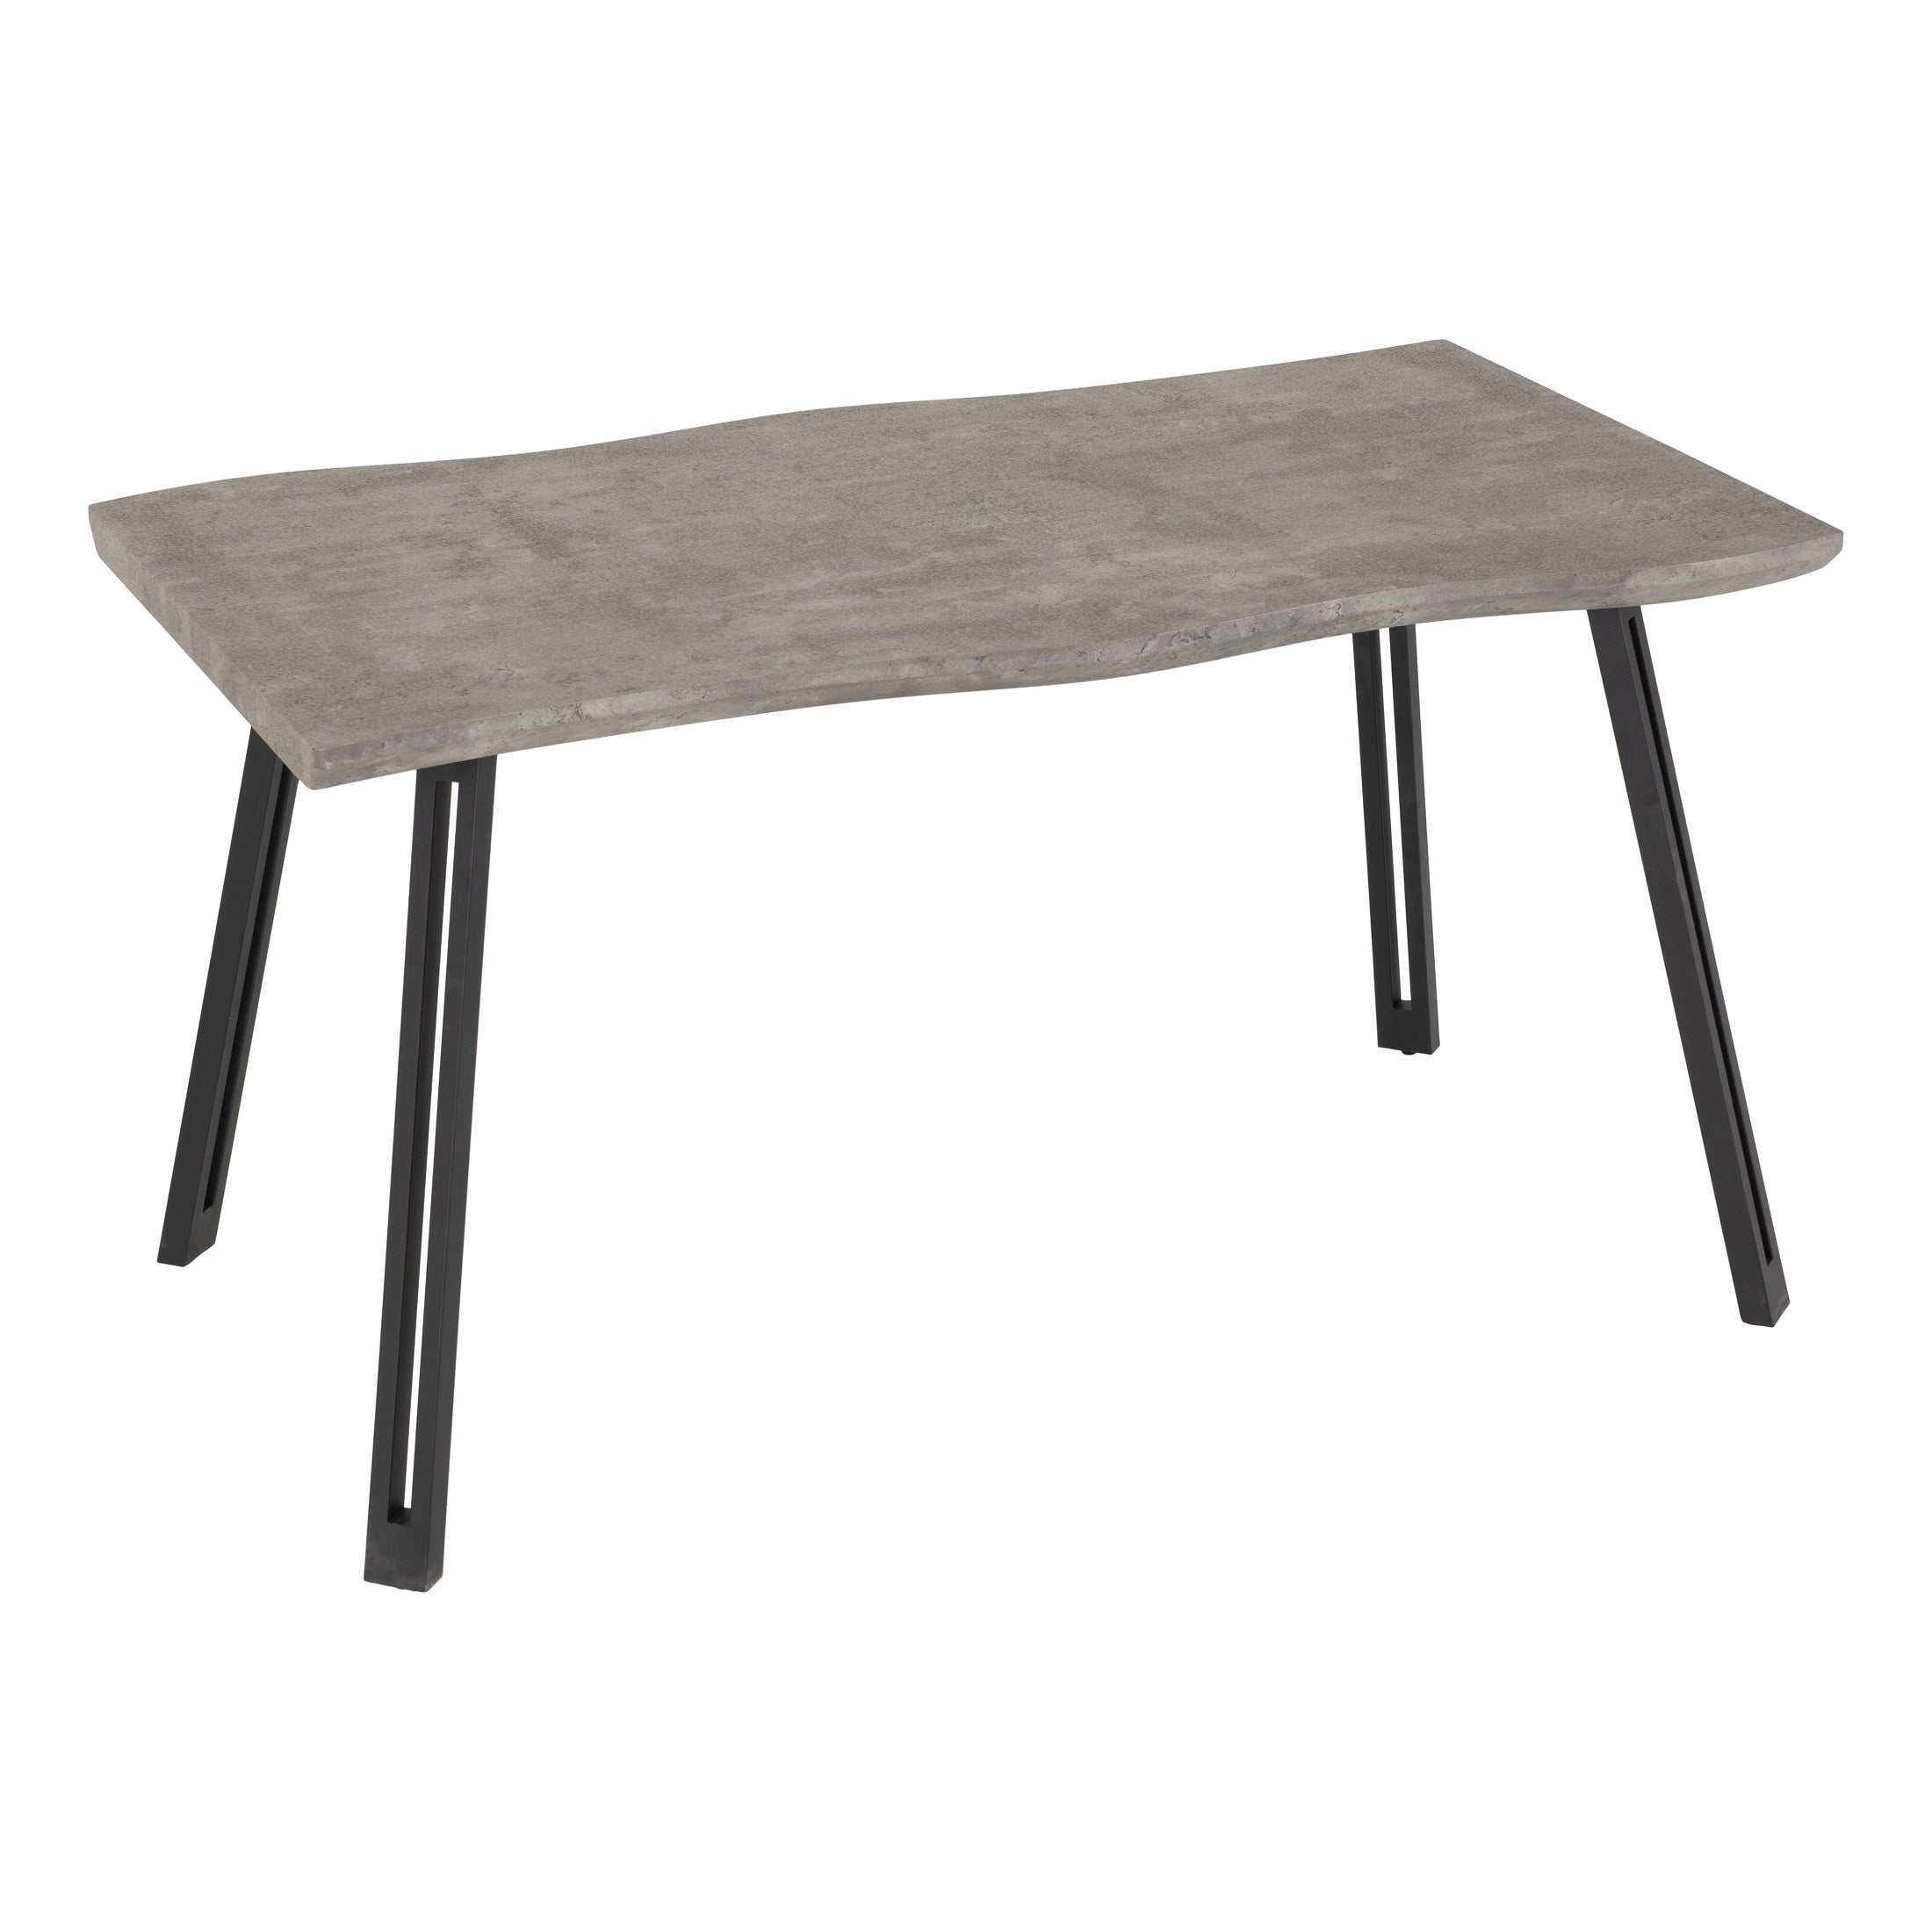 Quebec Wave 4 Seater Rectangular Dining Table, Grey Concrete Effect 